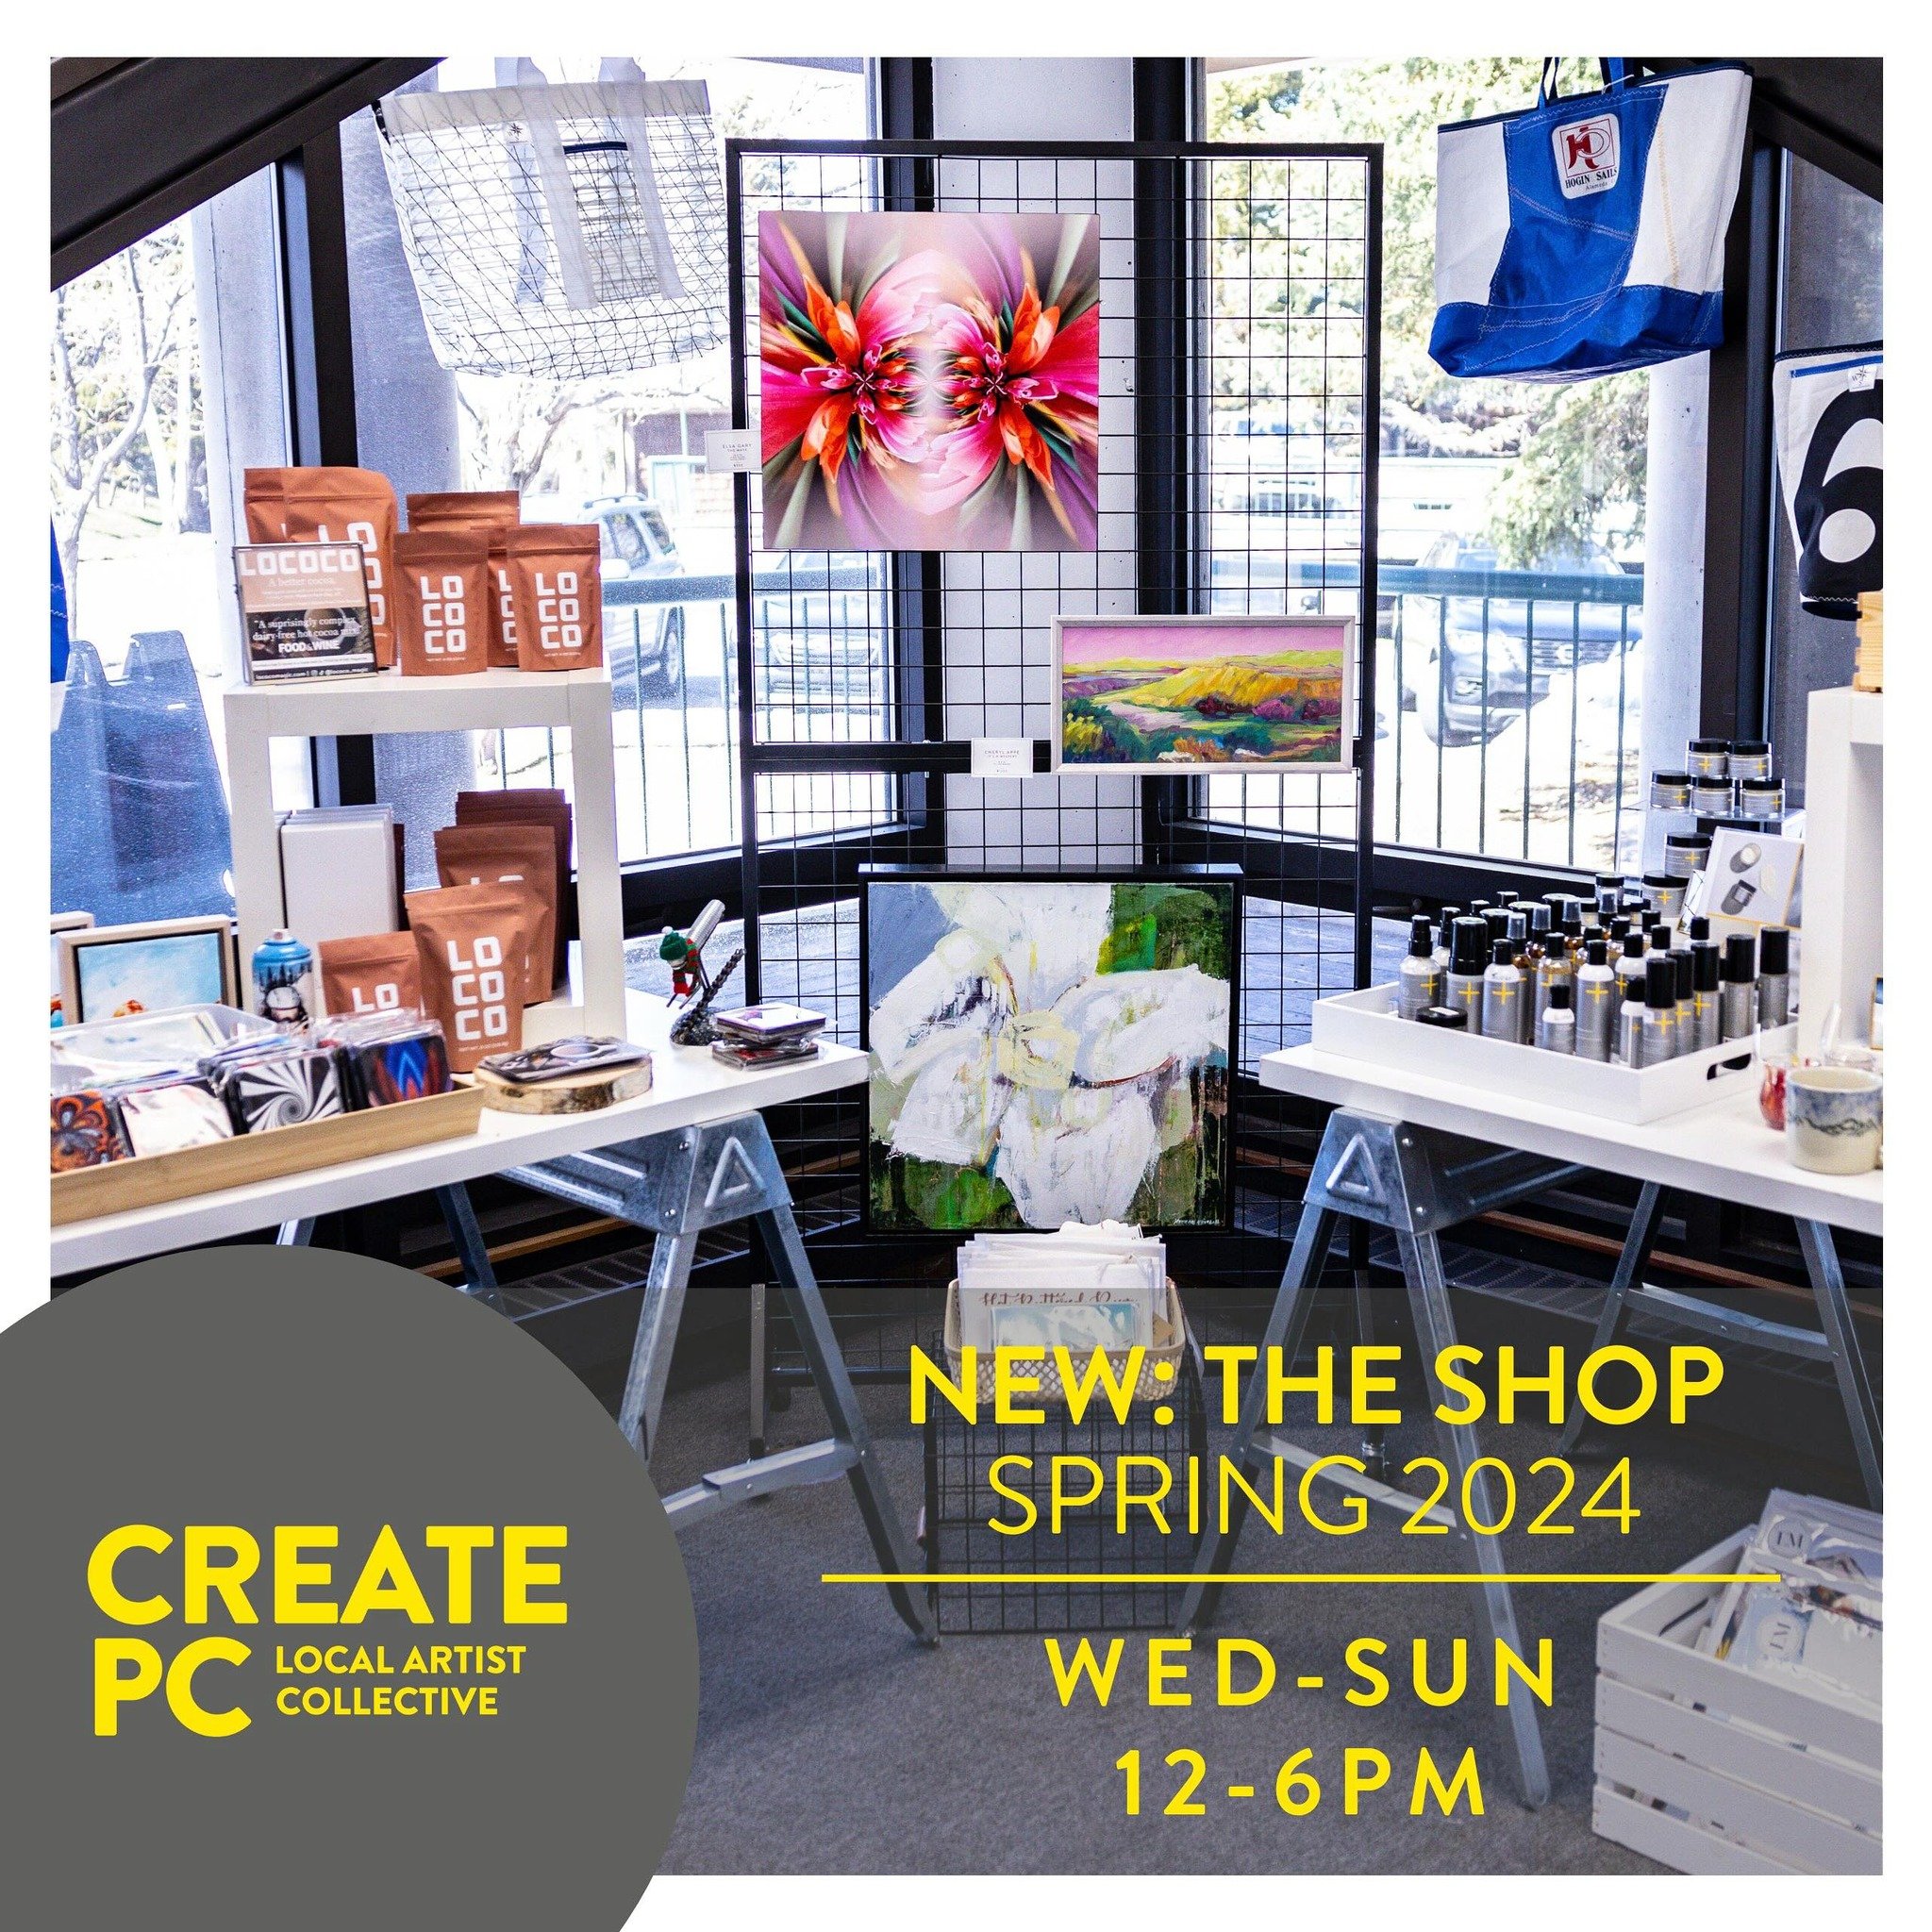 We are on to something so good! 

The Shop at CREATE PC has launched. Find one-of-a-kind jewelry, pottery, paintings, skin care, artisanal goods and more. All items were created right here in Summit County, UT. And, you can find something in every pr